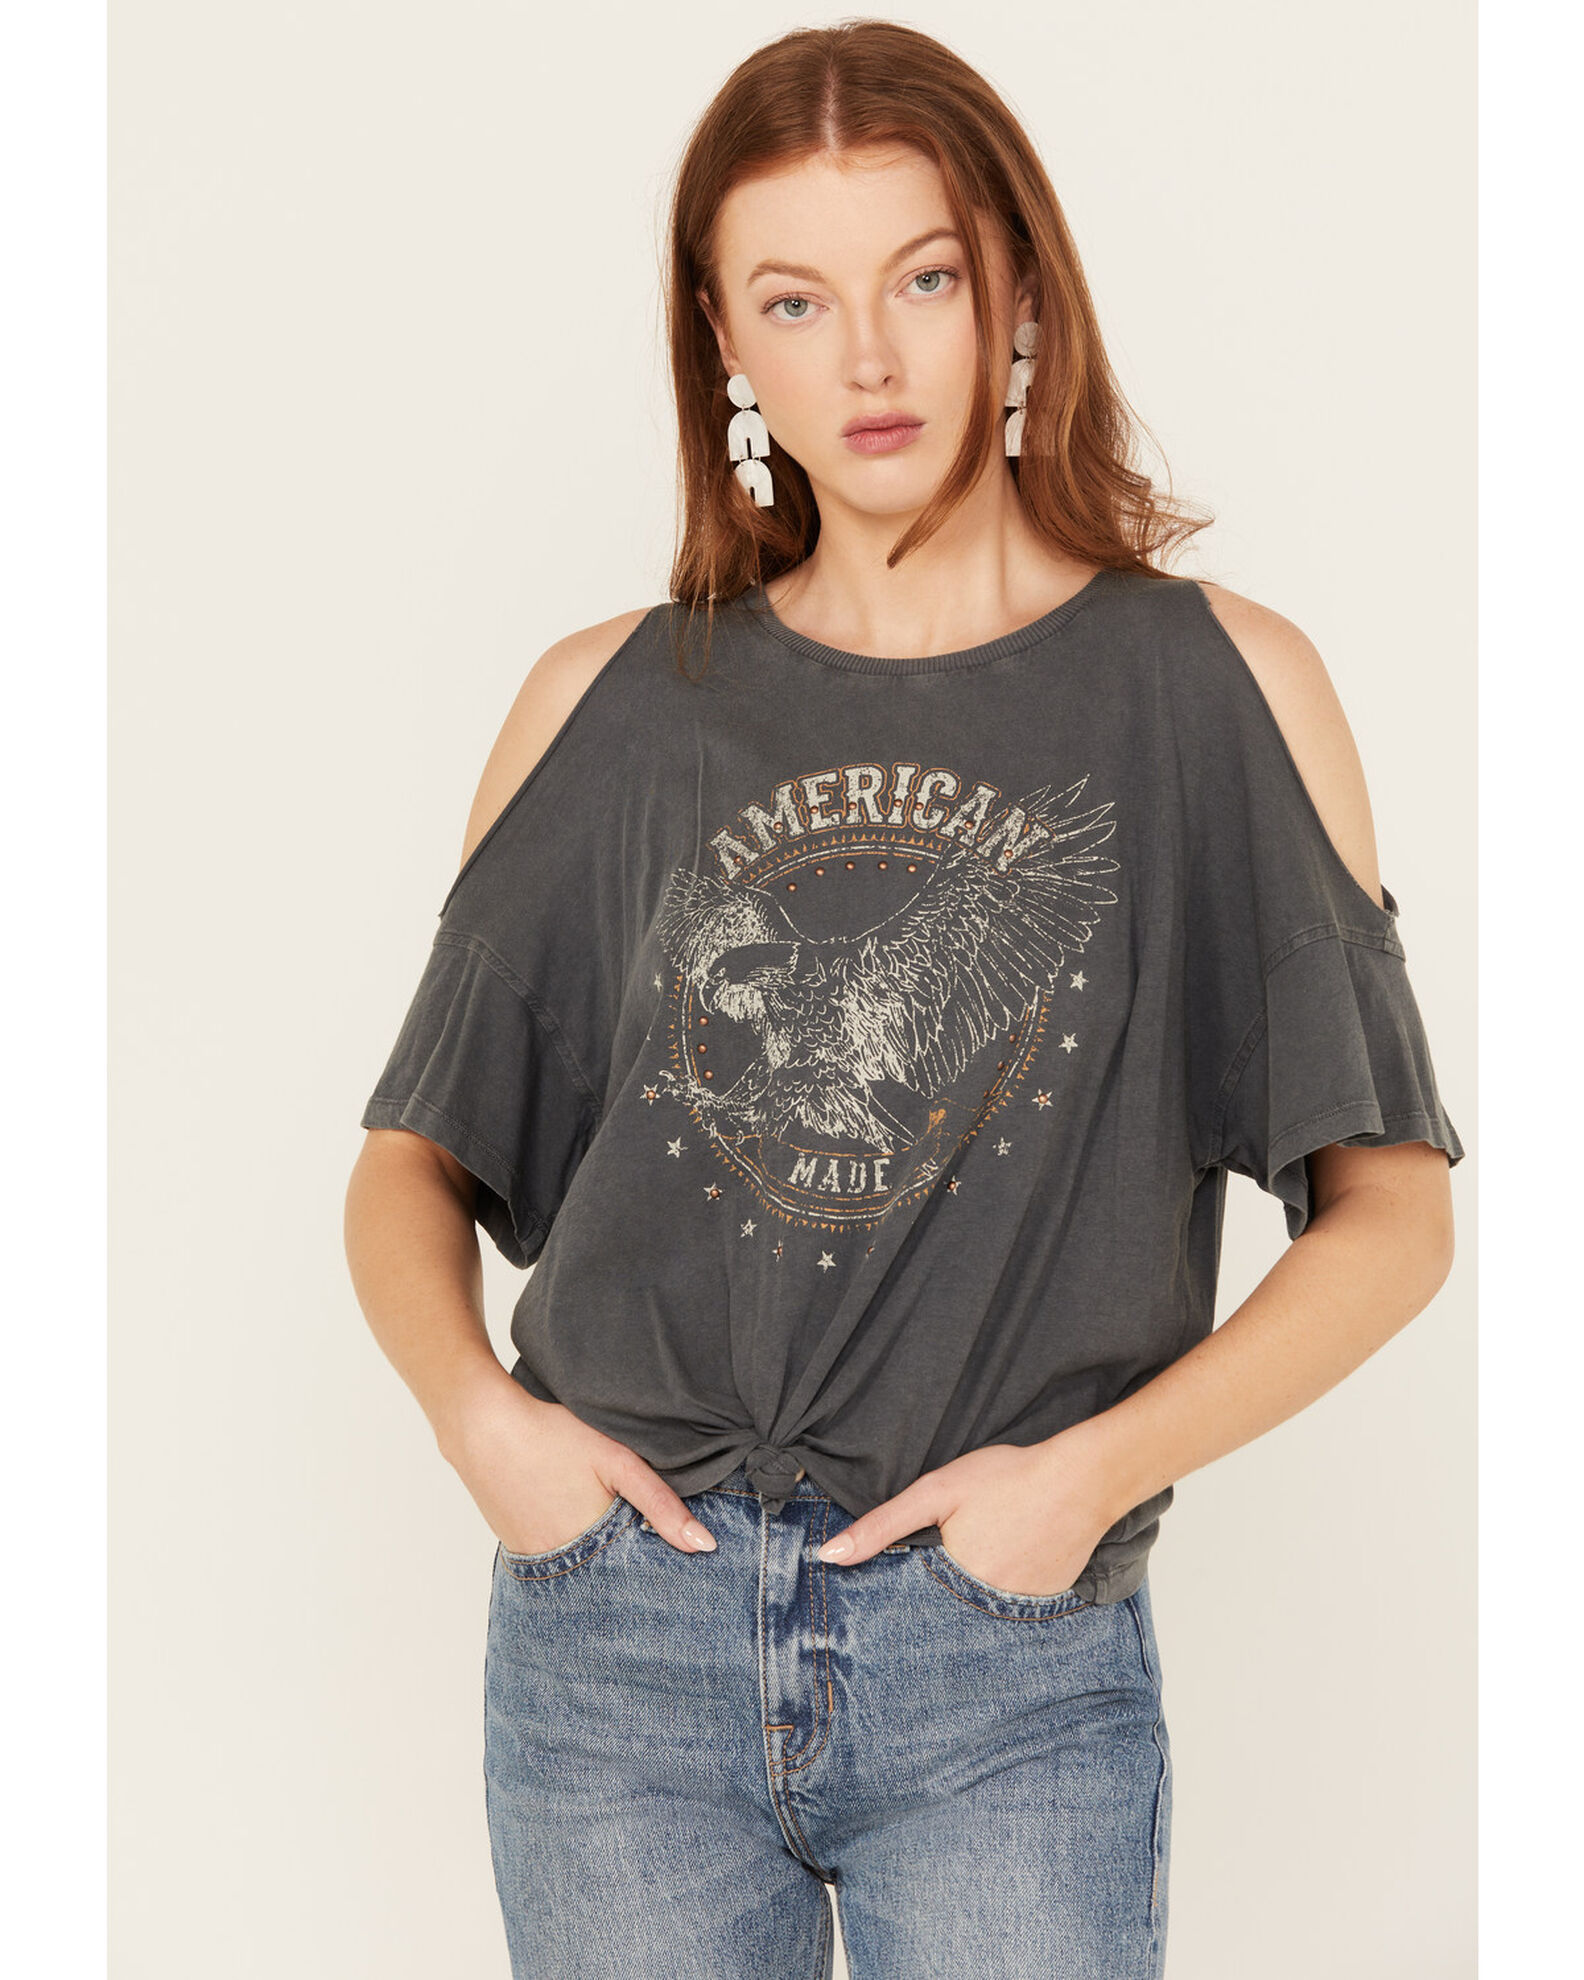 White Crow Women's American Eagle Cold Shoulder Graphic Tee